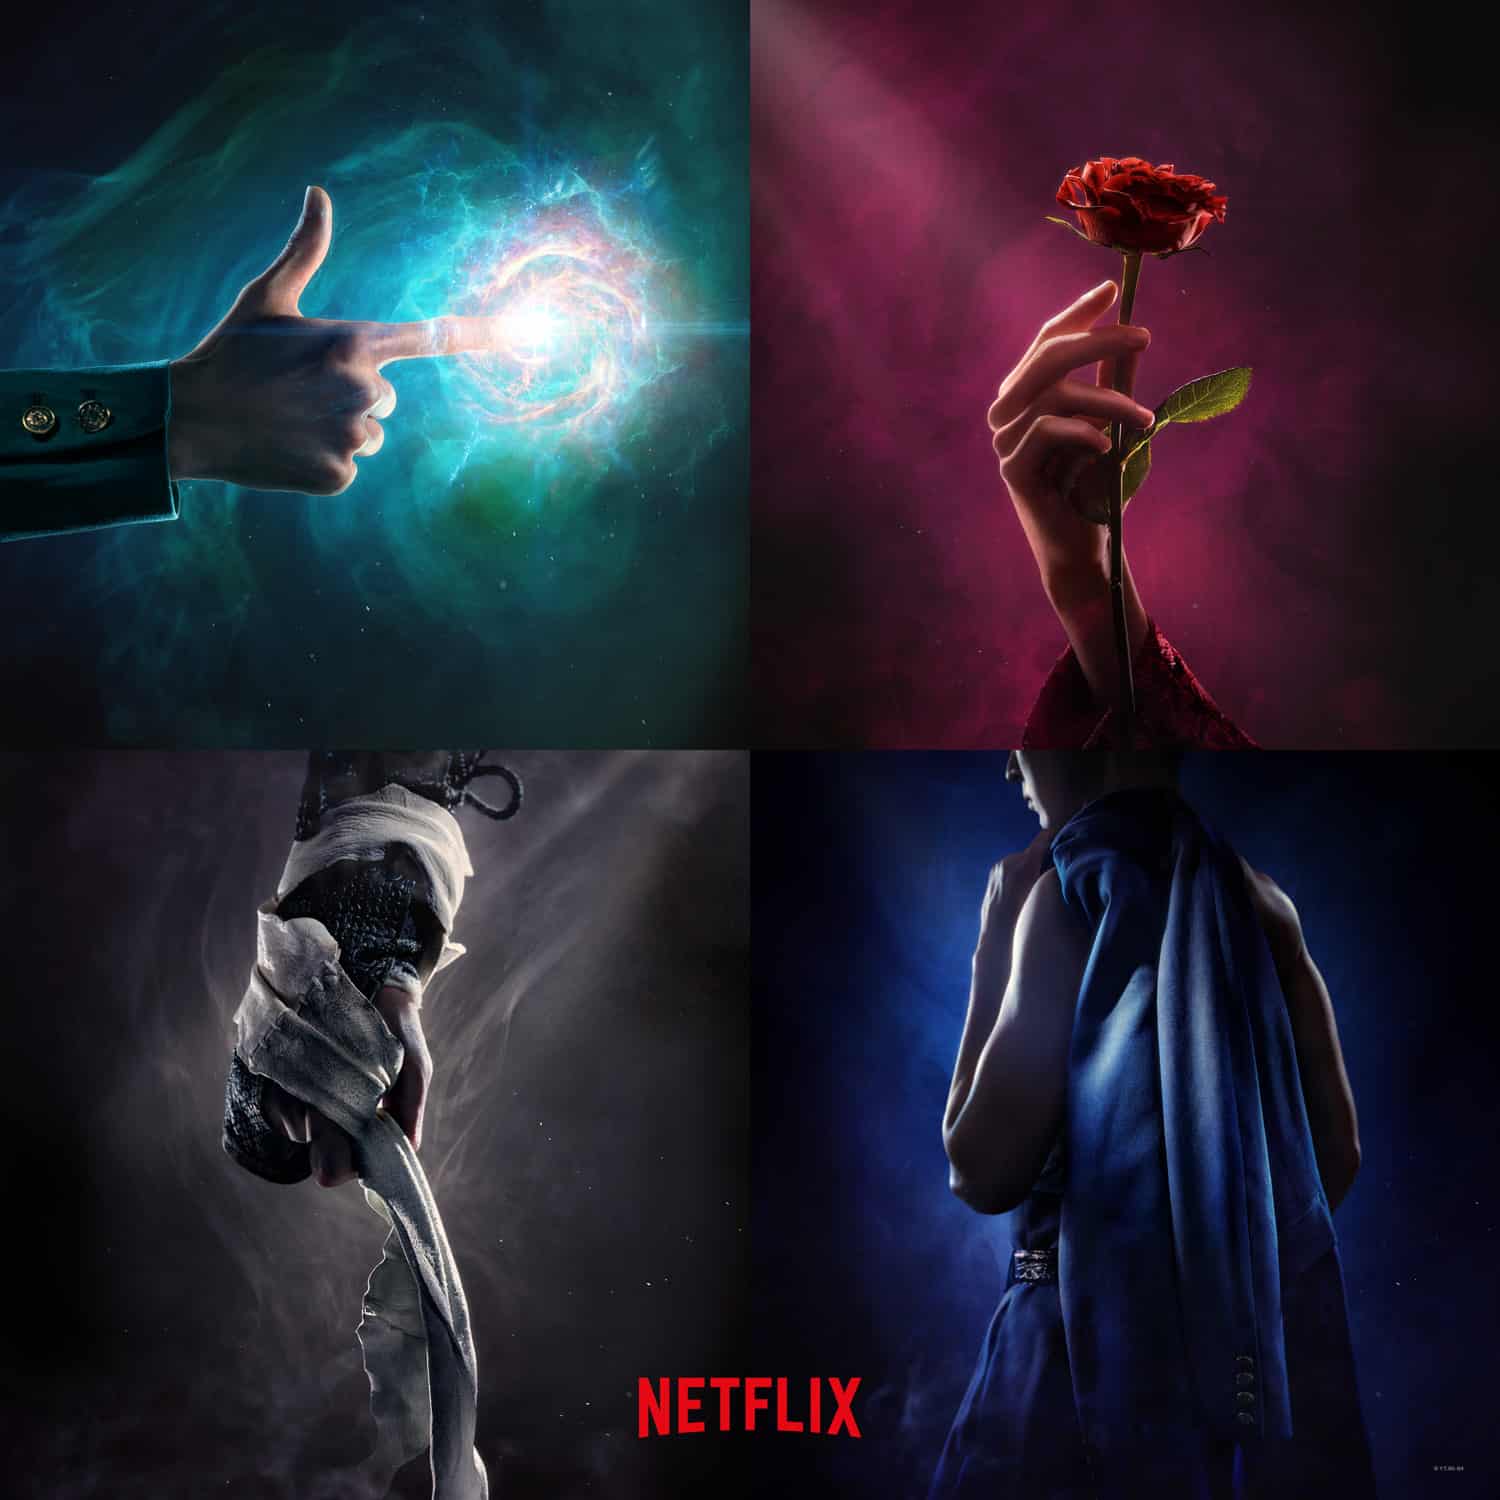 Netflix Announces 'Yu Yu Hakusho' Main Cast with Exclusive Character Posters